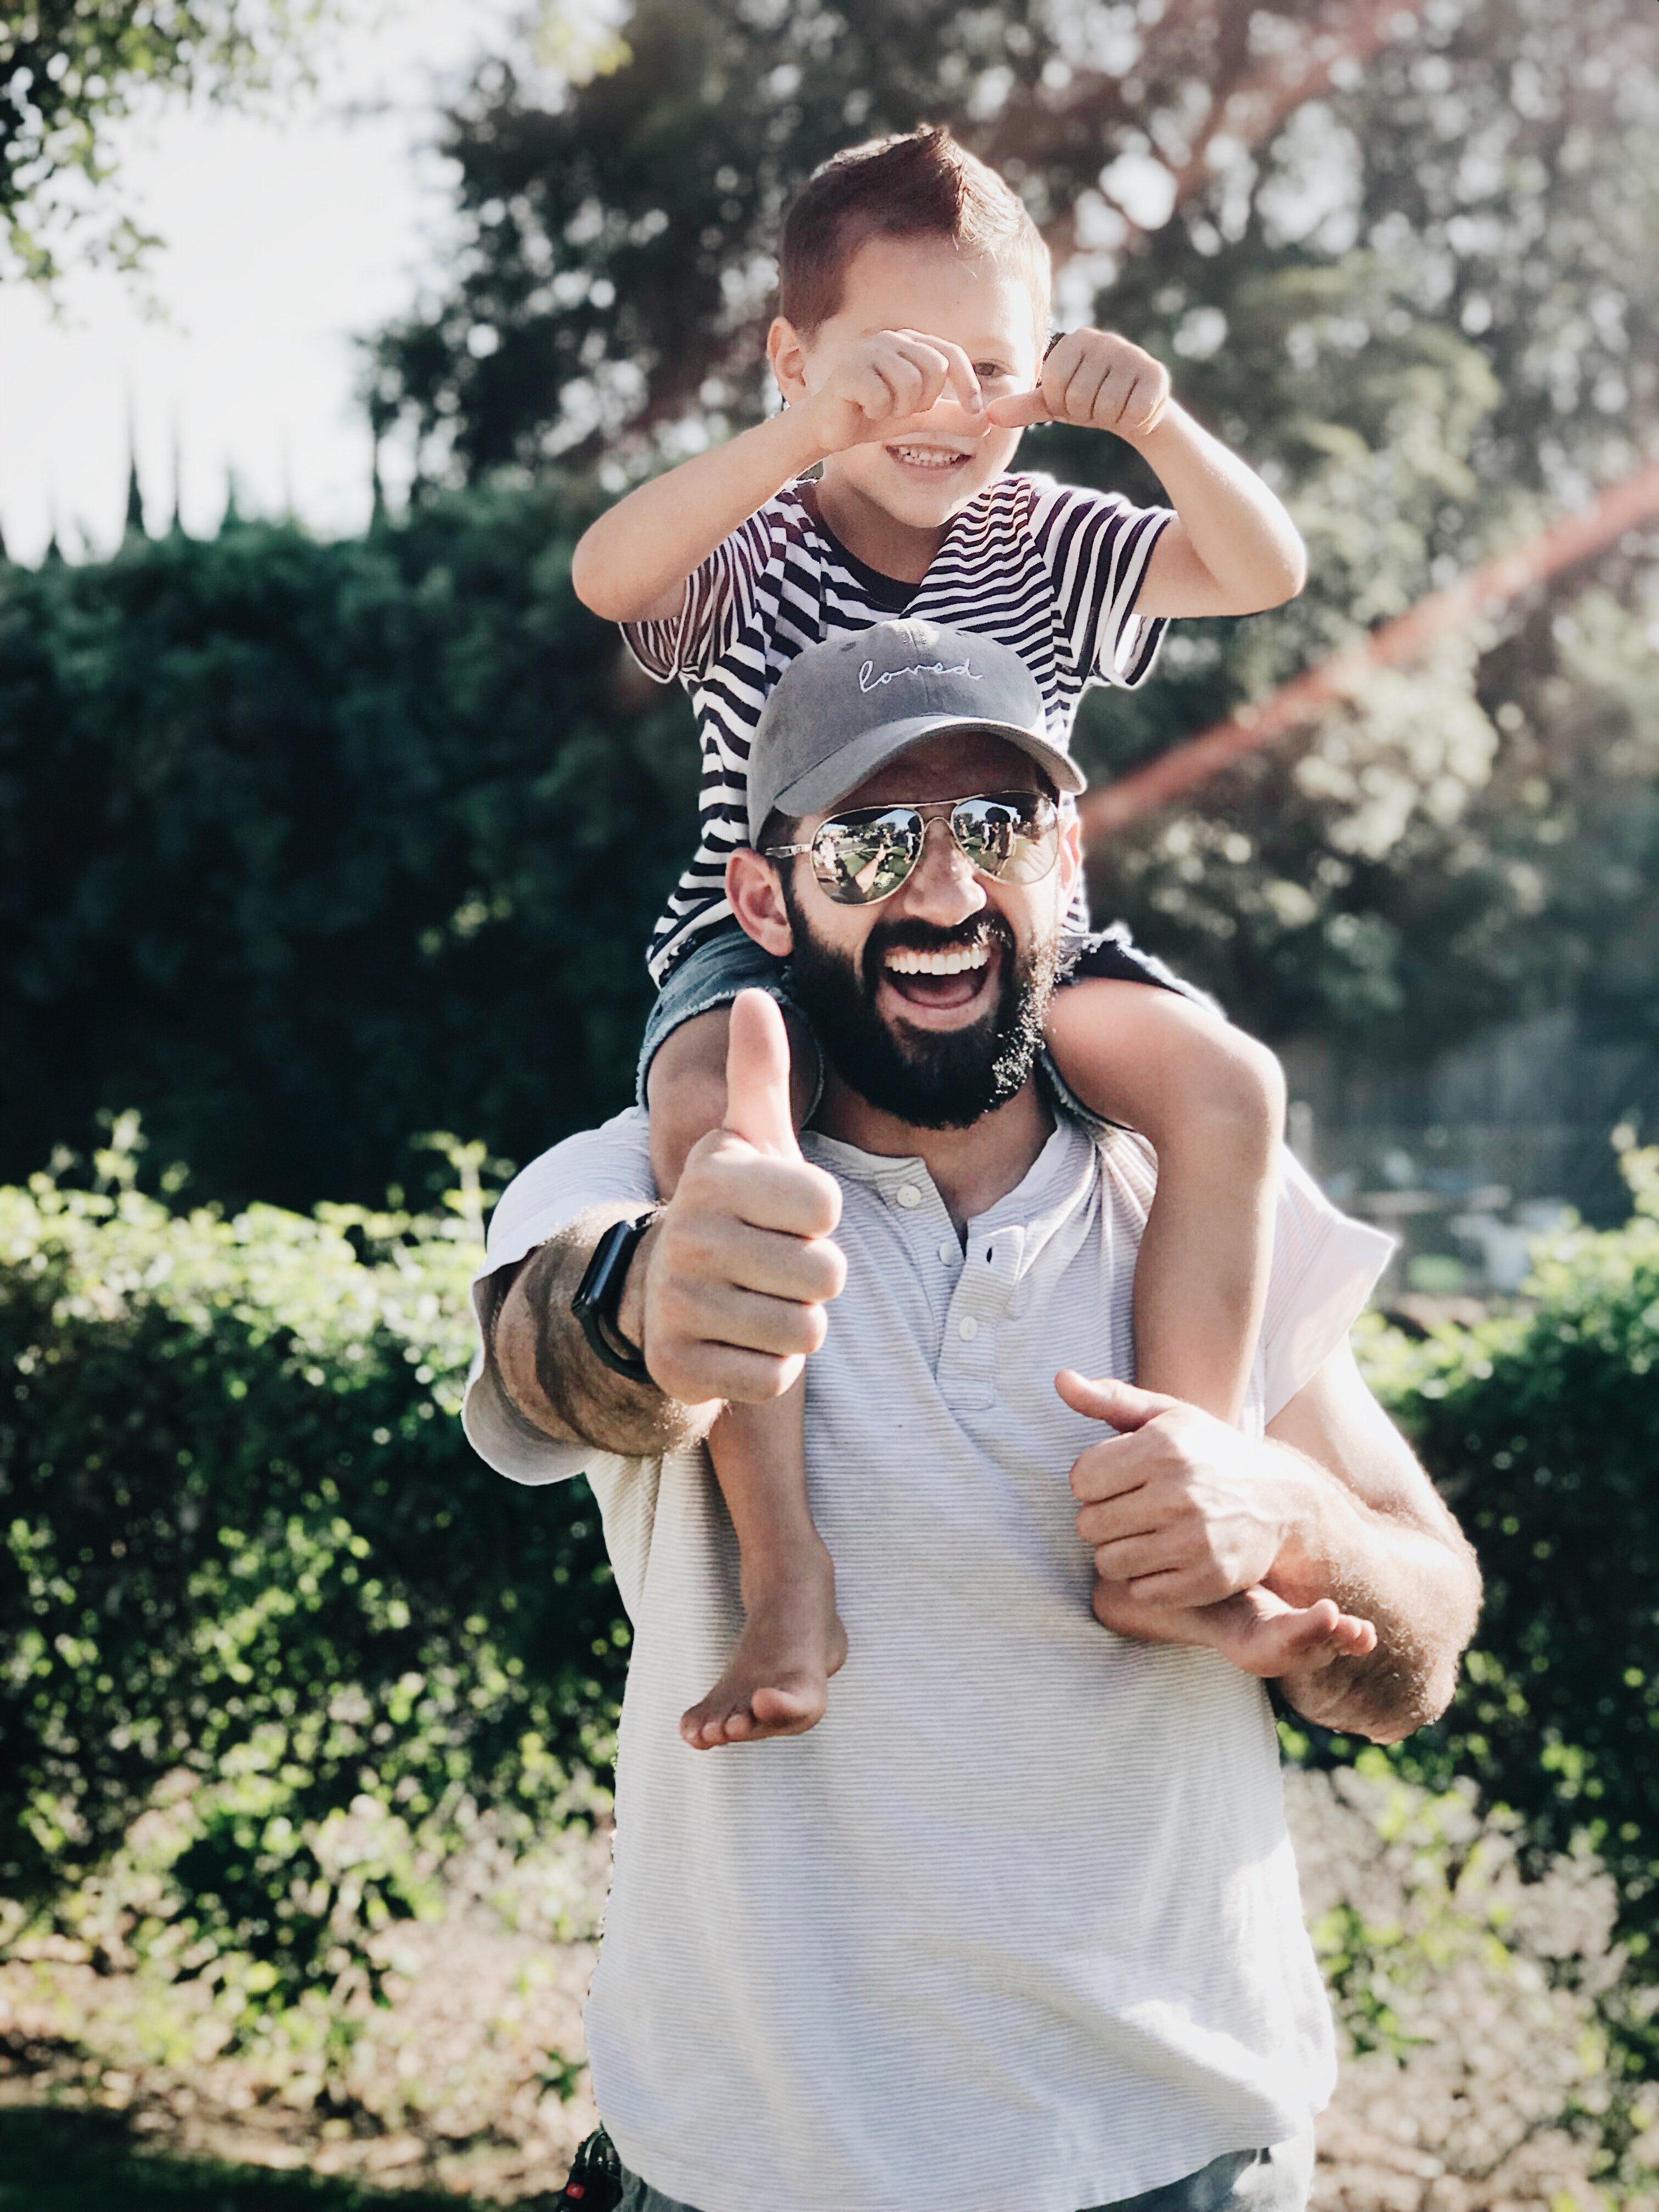 An image of a father and his son | Photo: Pexels